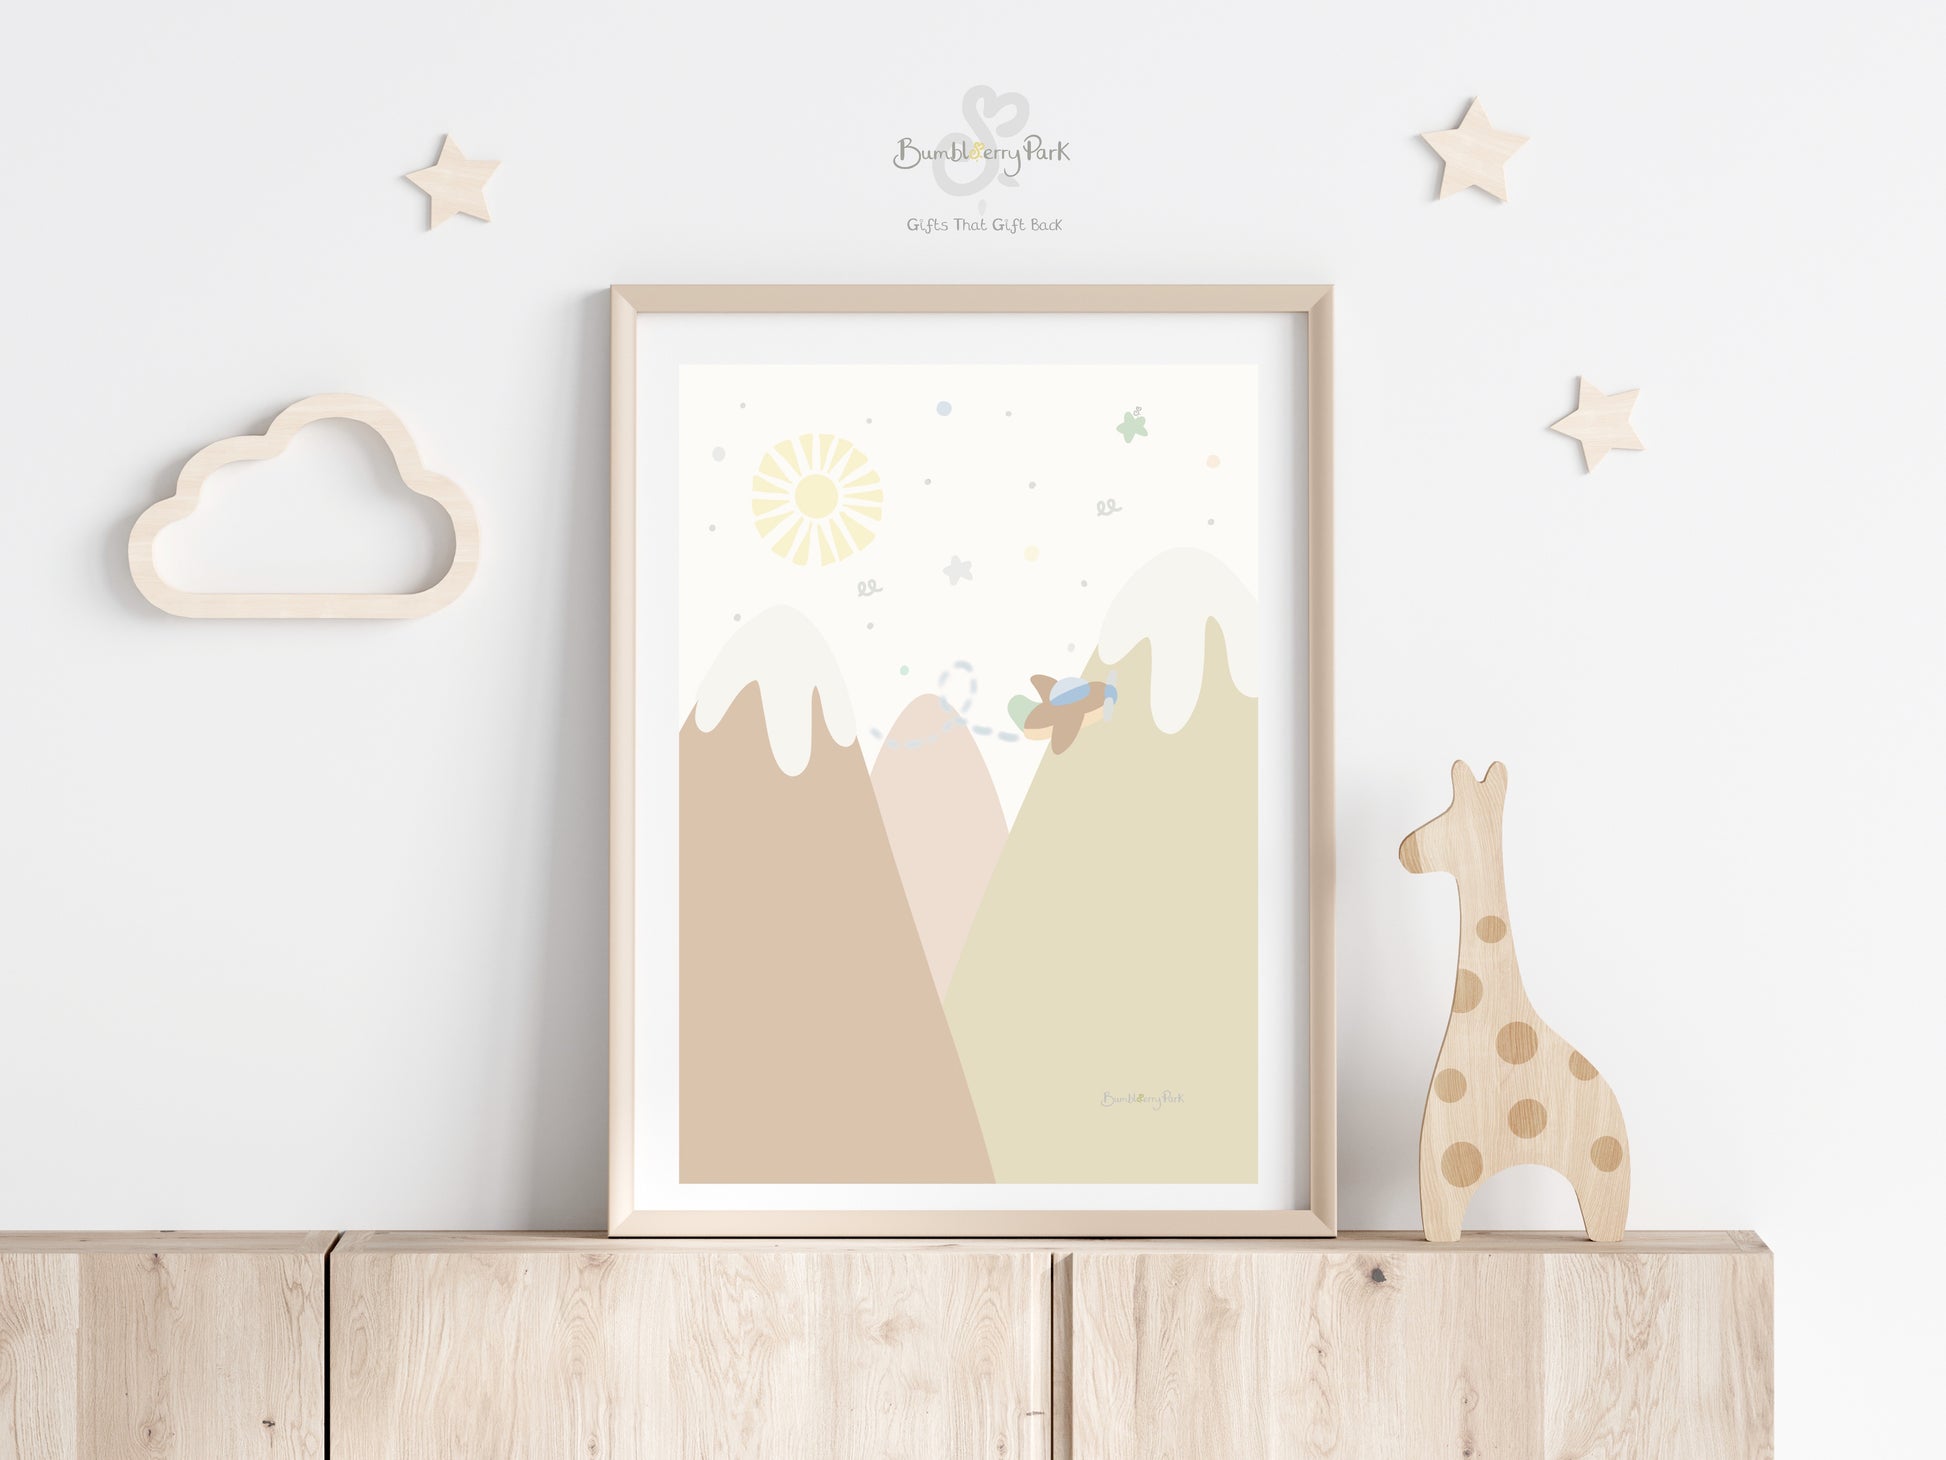 scandi inspired little explorer nursery posters for children's bedroom. Neutral nursery decor prints with travel and transport theme decor with mountains, sunshine, hot air balloon and aeroplane features